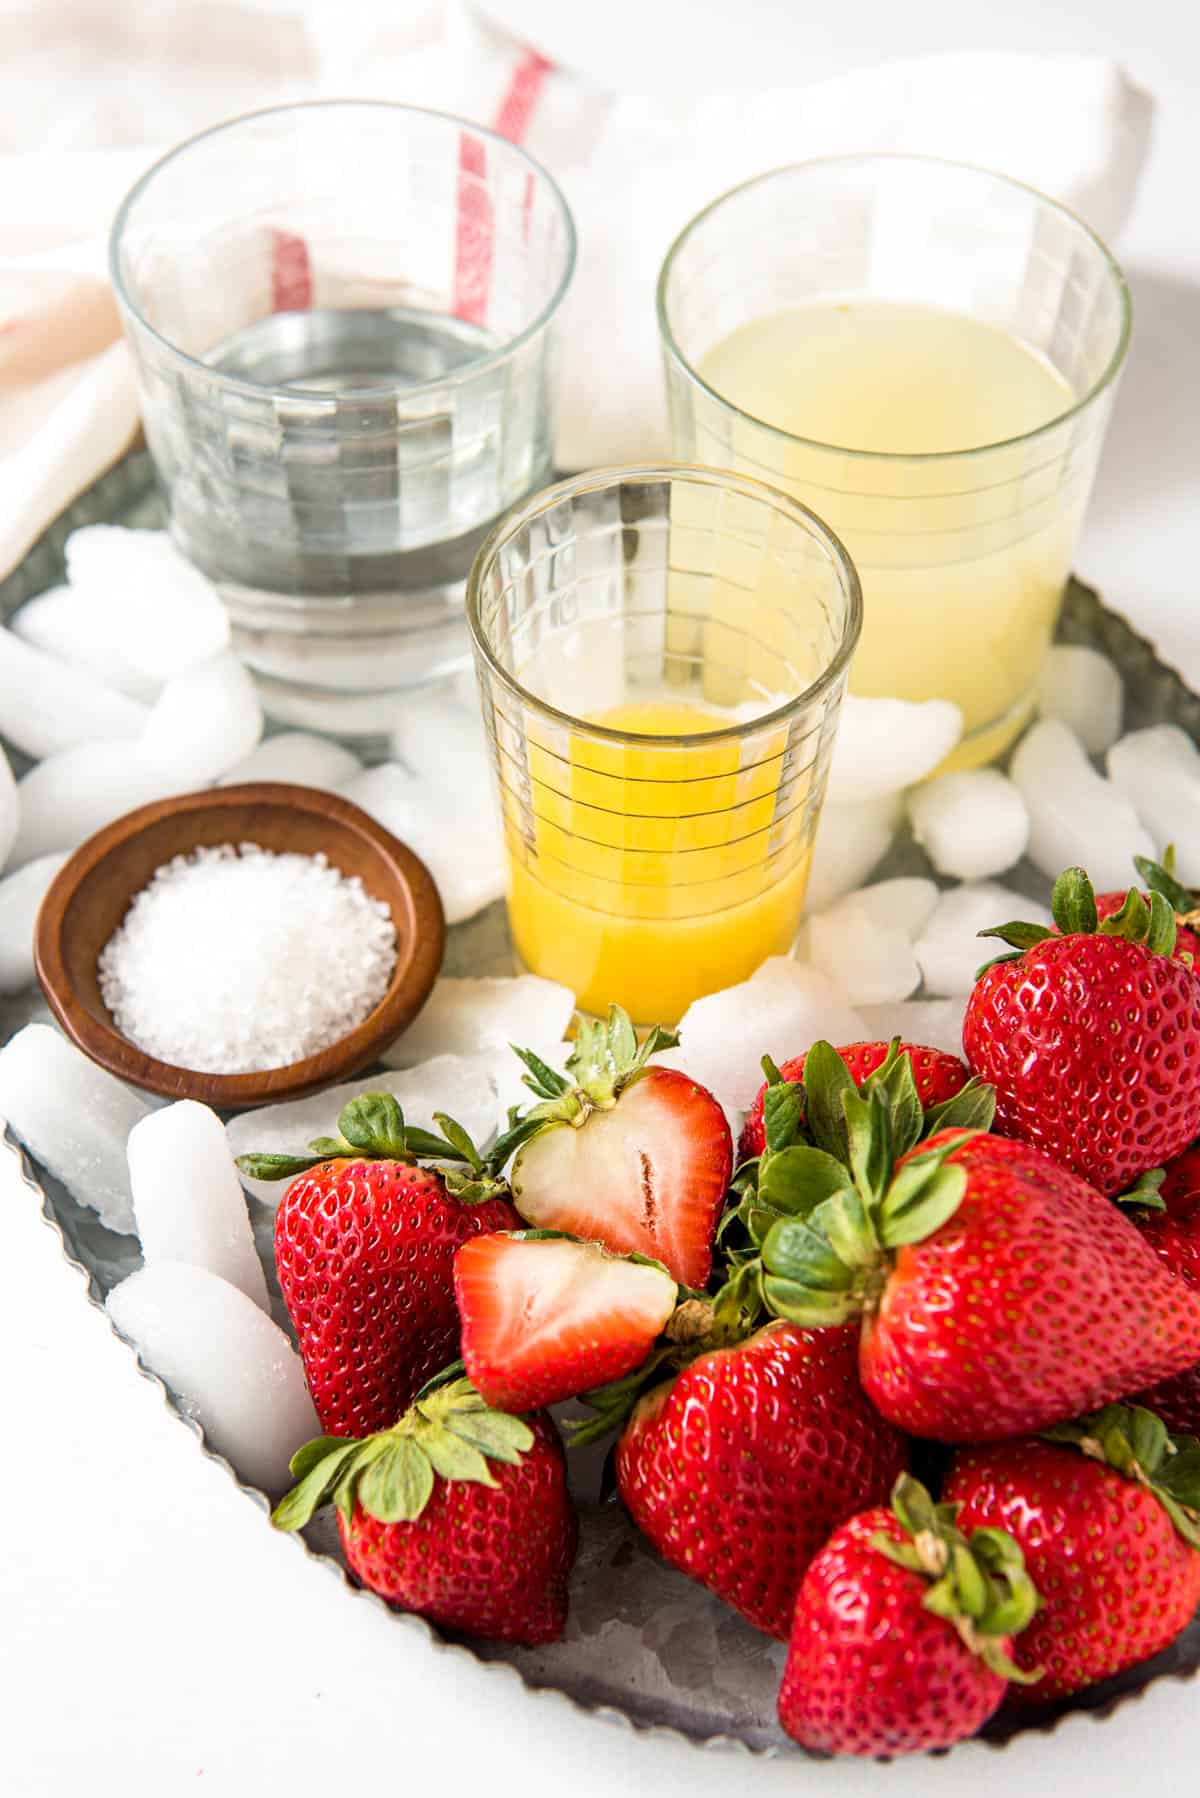 All of the ingredients for a strawberry margarita on a tray on a white counter.